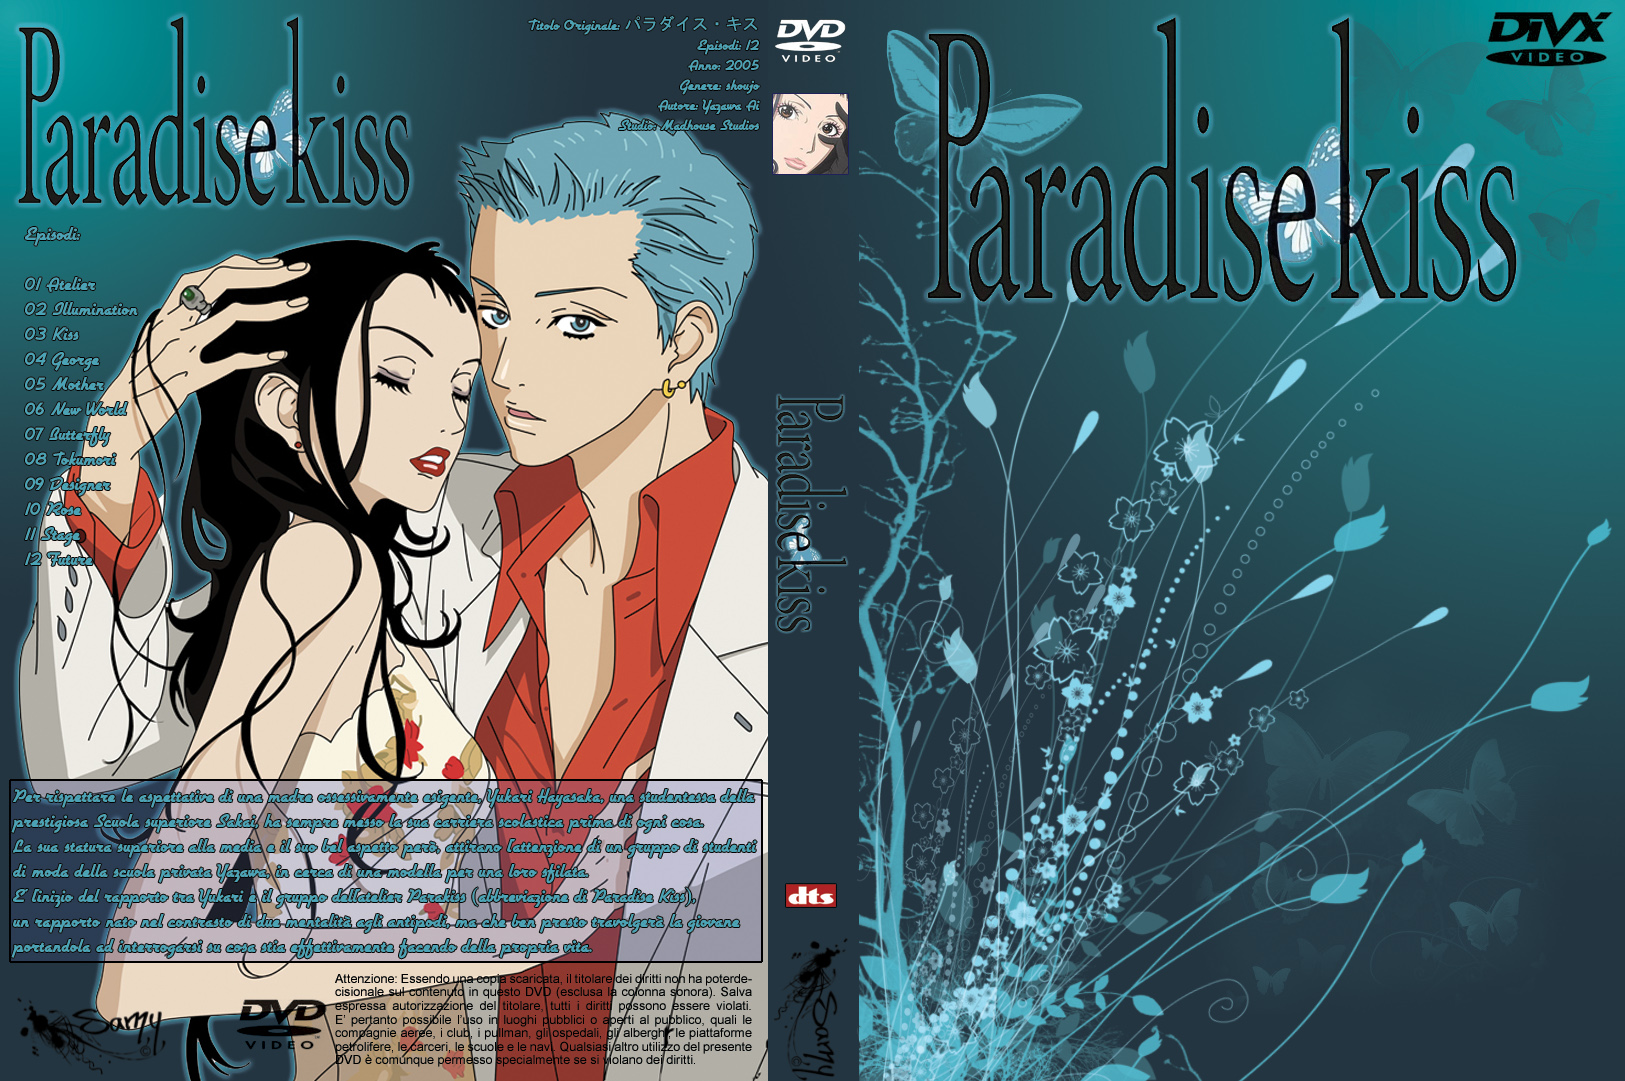 Amazing Paradise Kiss Pictures & Backgrounds